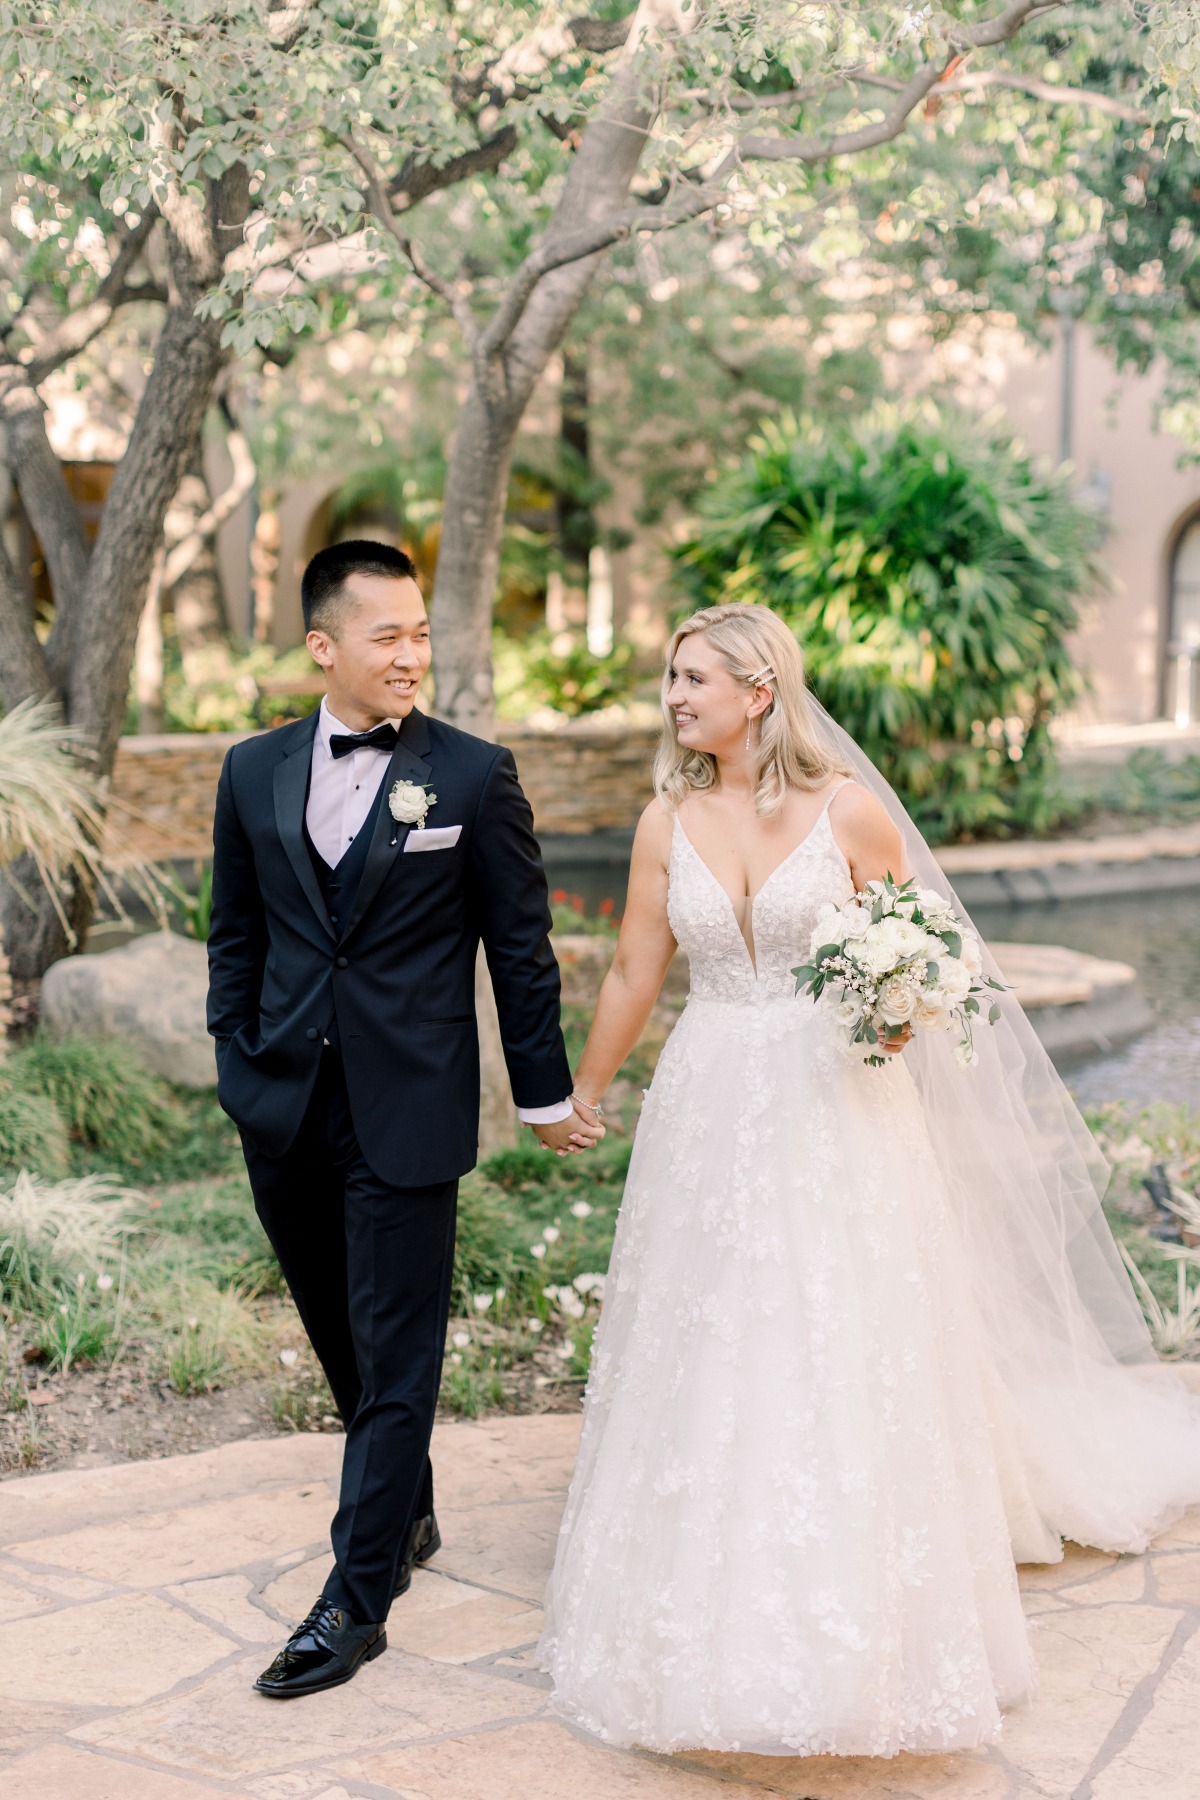 College Sweethearts Tie The Knot In An Intimate Backyard Ceremony